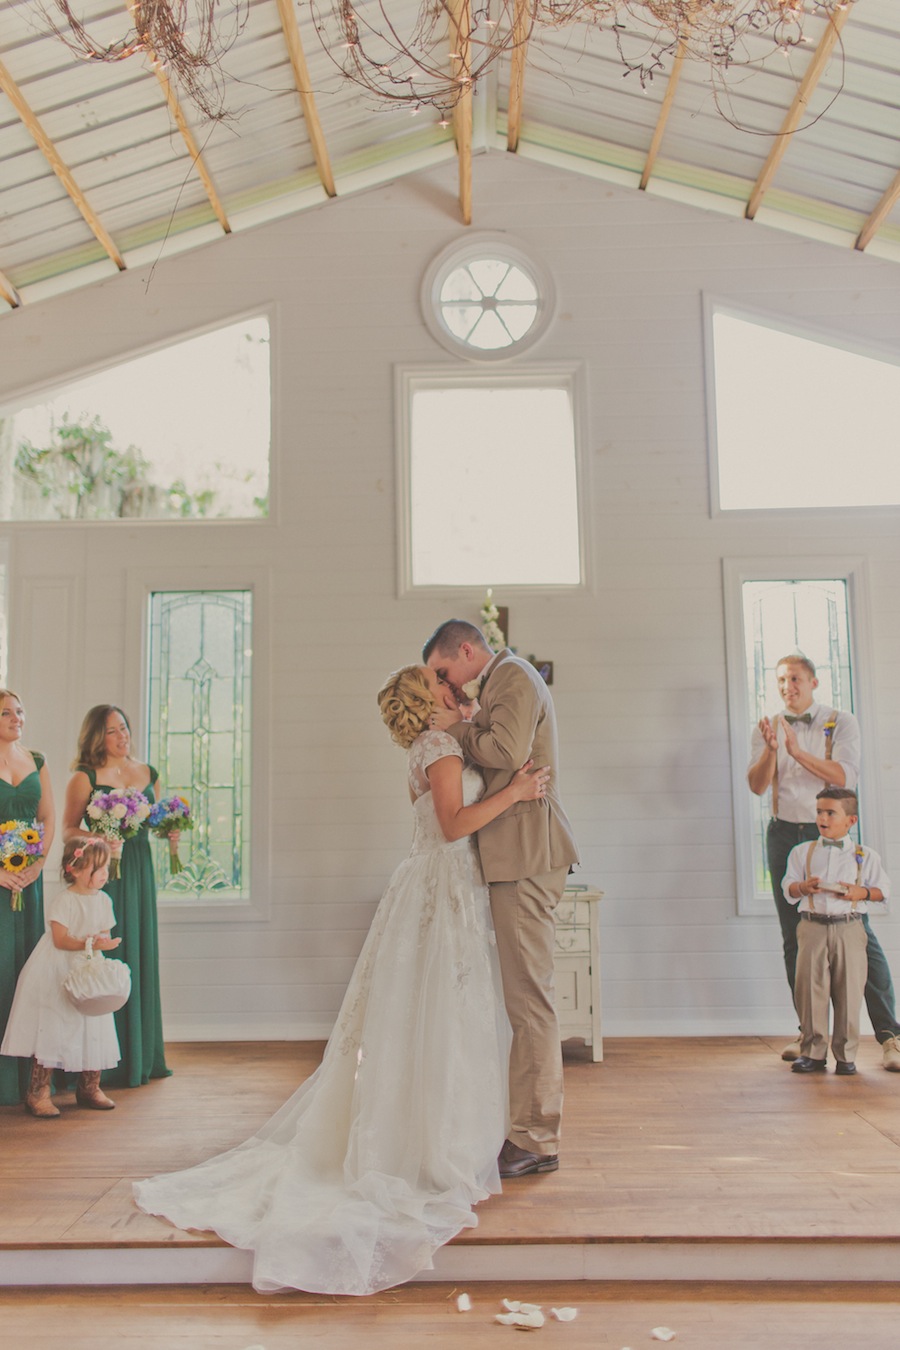 Rustic, Cross Creek Ranch Chapel Wedding Ceremony | Bride and Groom First Kiss